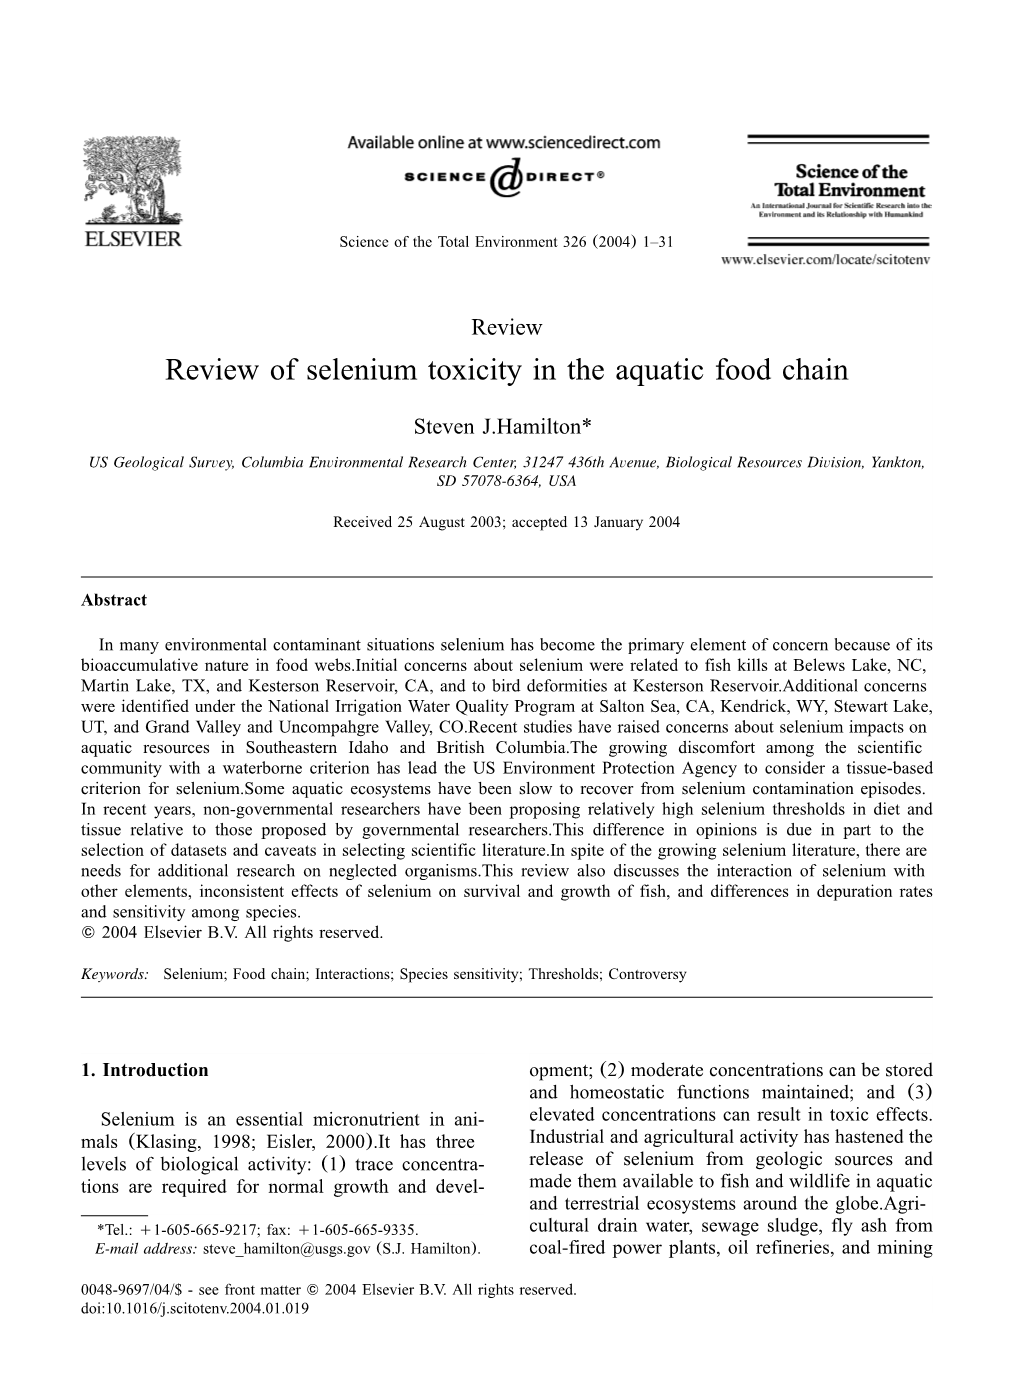 Review of Selenium Toxicity in the Aquatic Food Chain